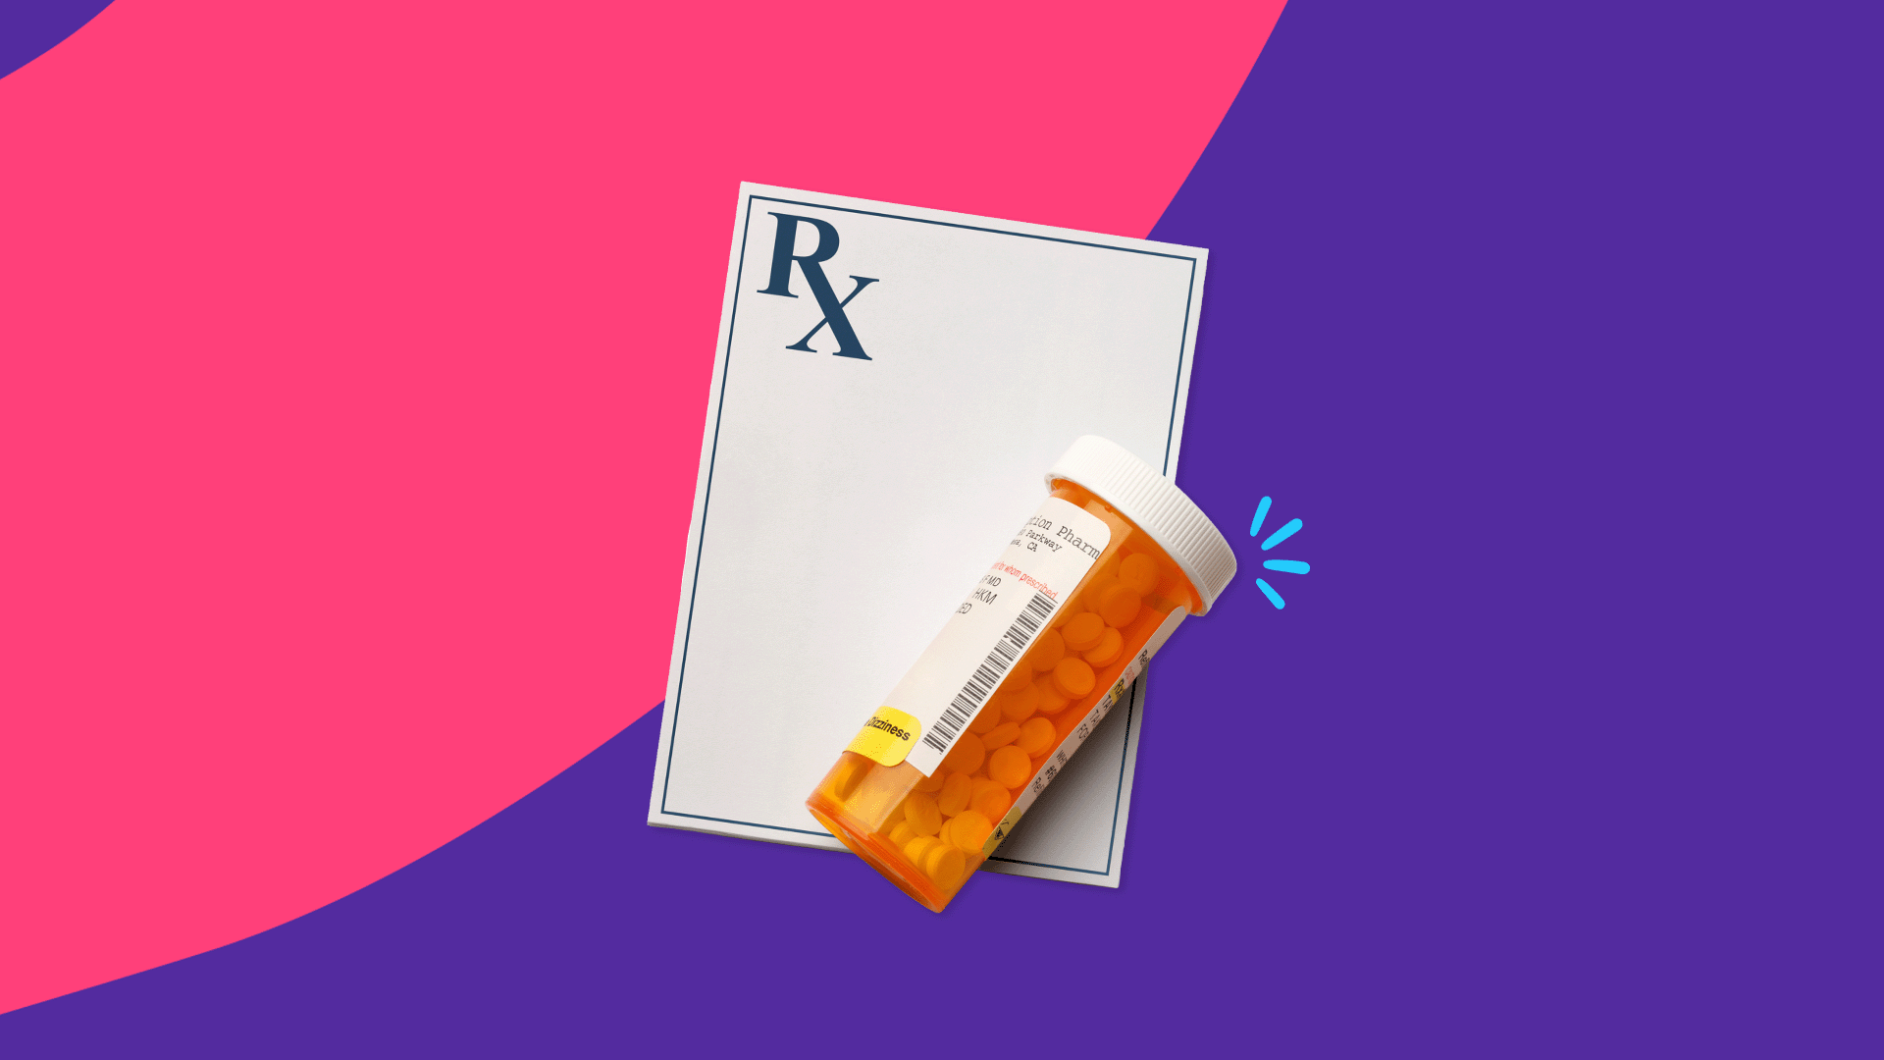 Rx pill bottle and prescription pad: Propranolol for anxiety